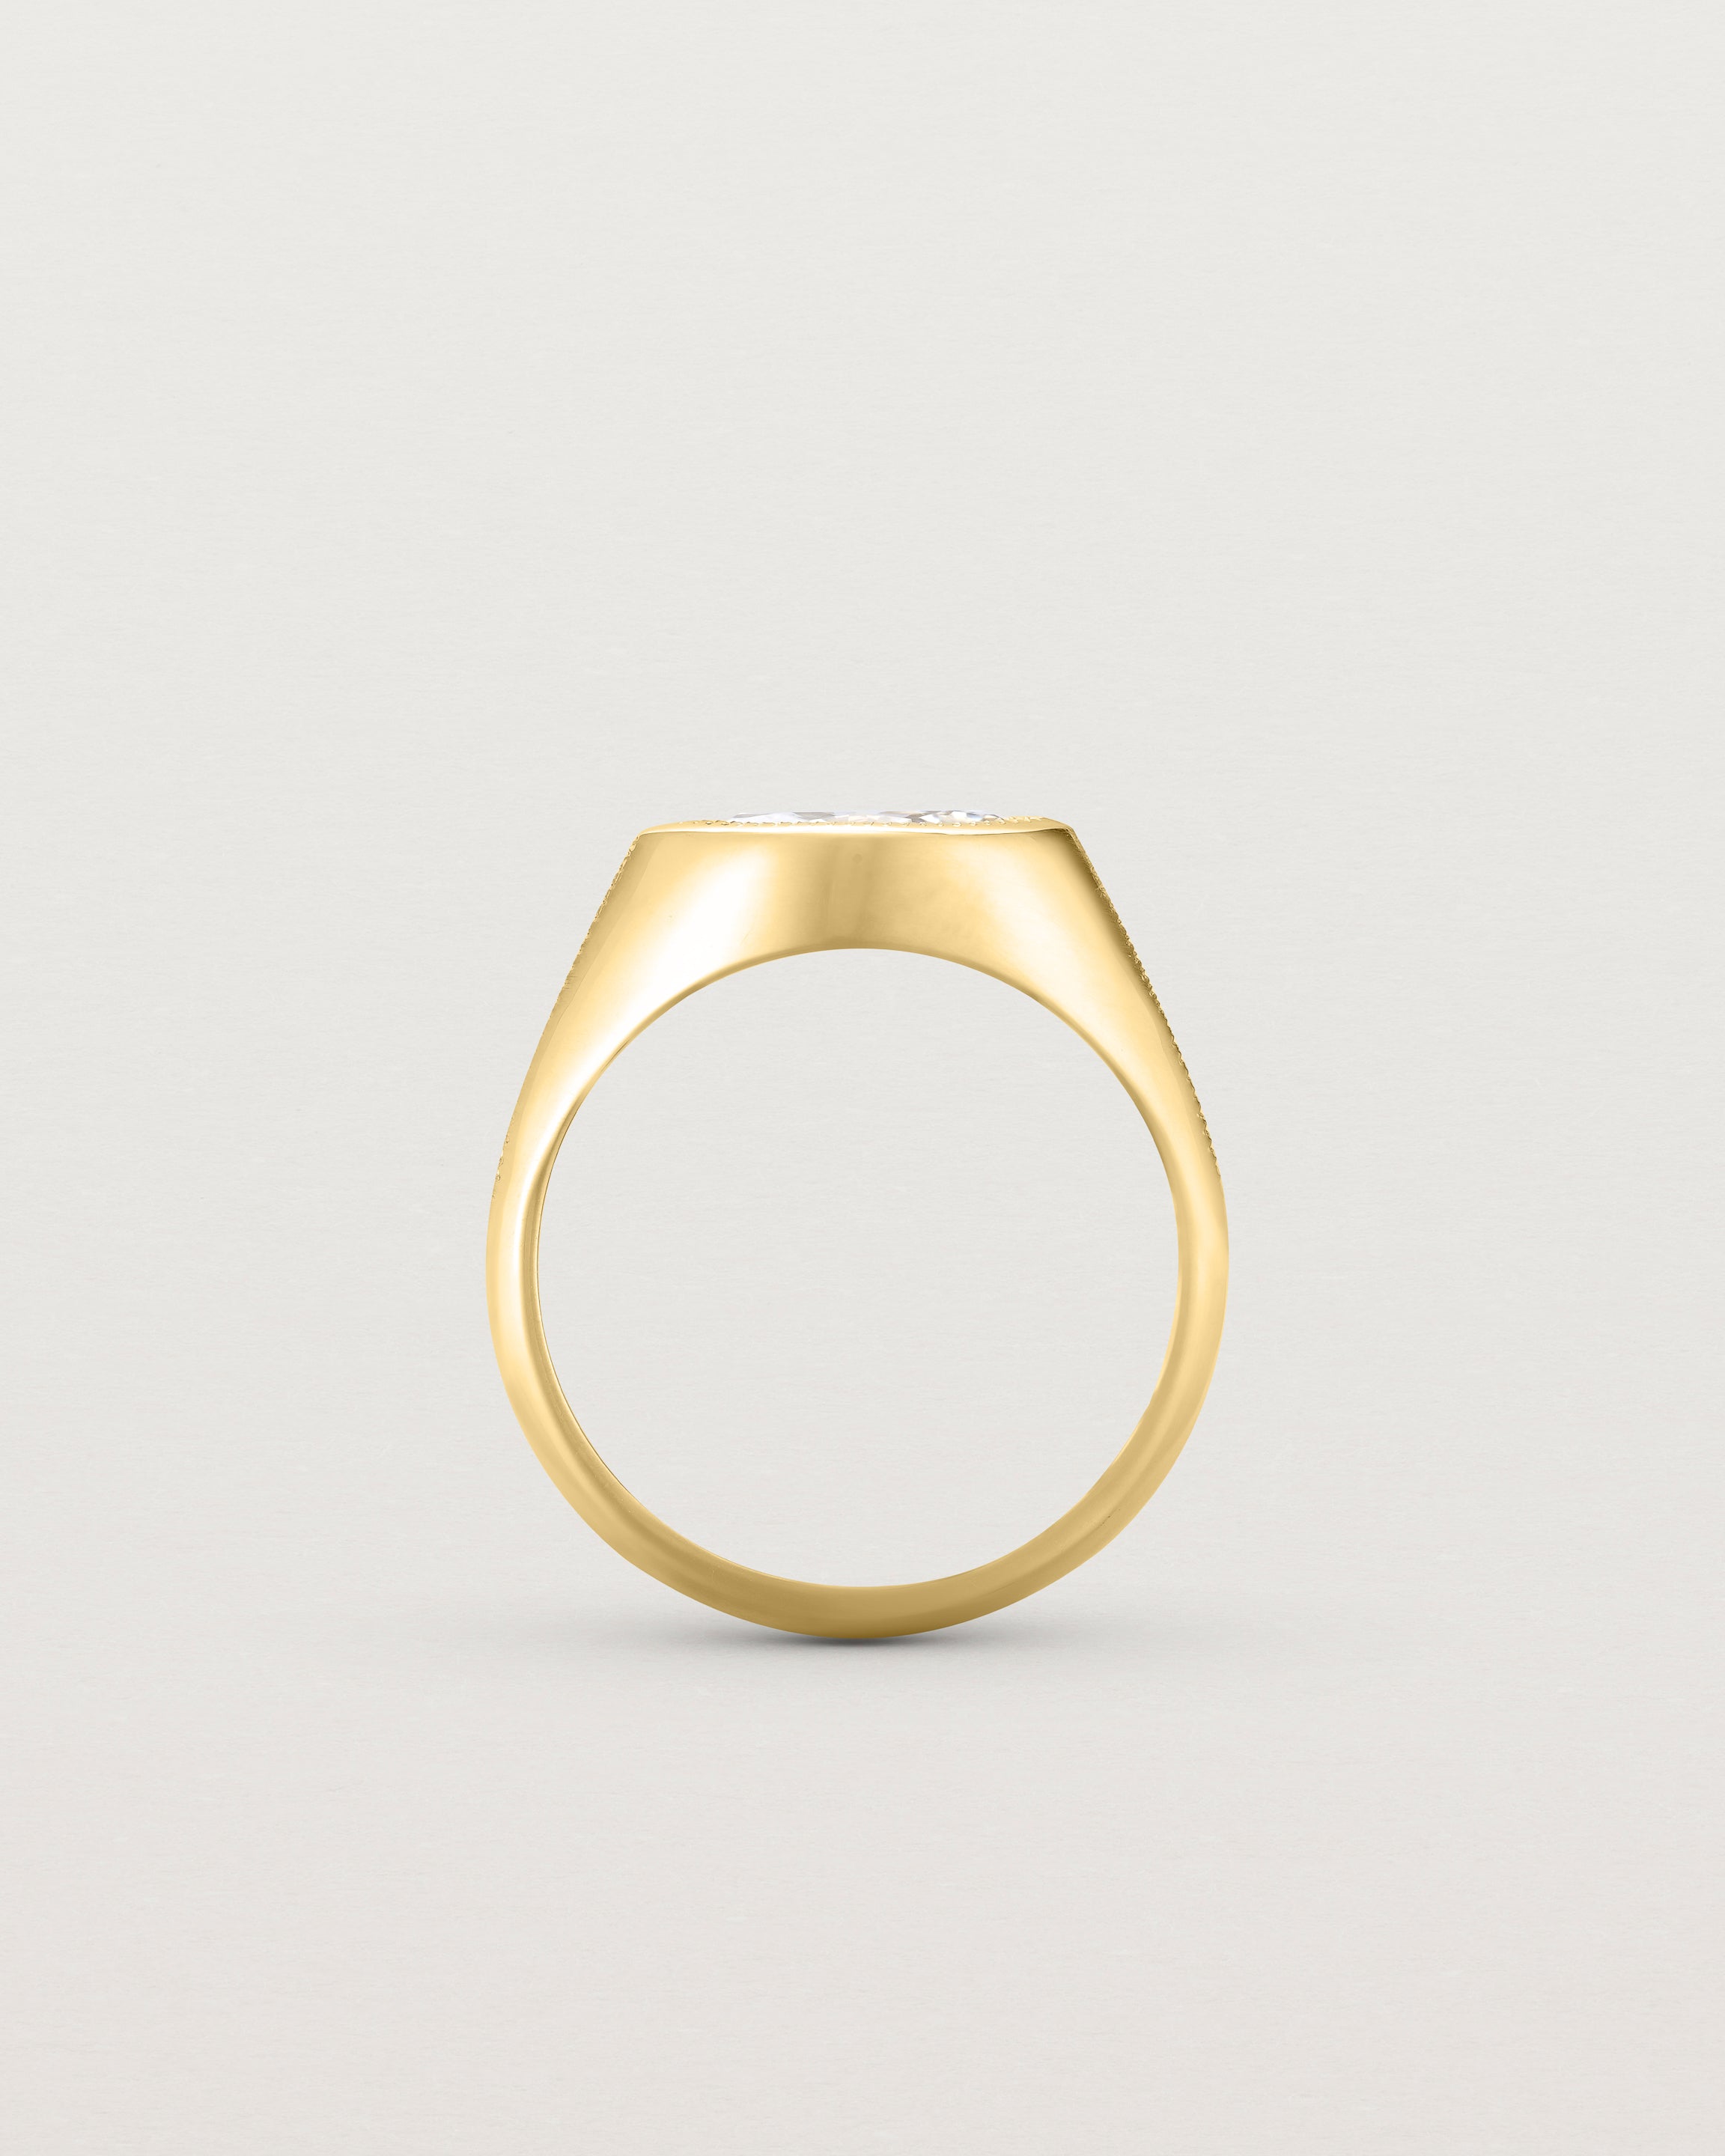 Standing view of the Átlas Marquise Signet | Laboratory Grown Diamond in yellow gold, in a polished finish.